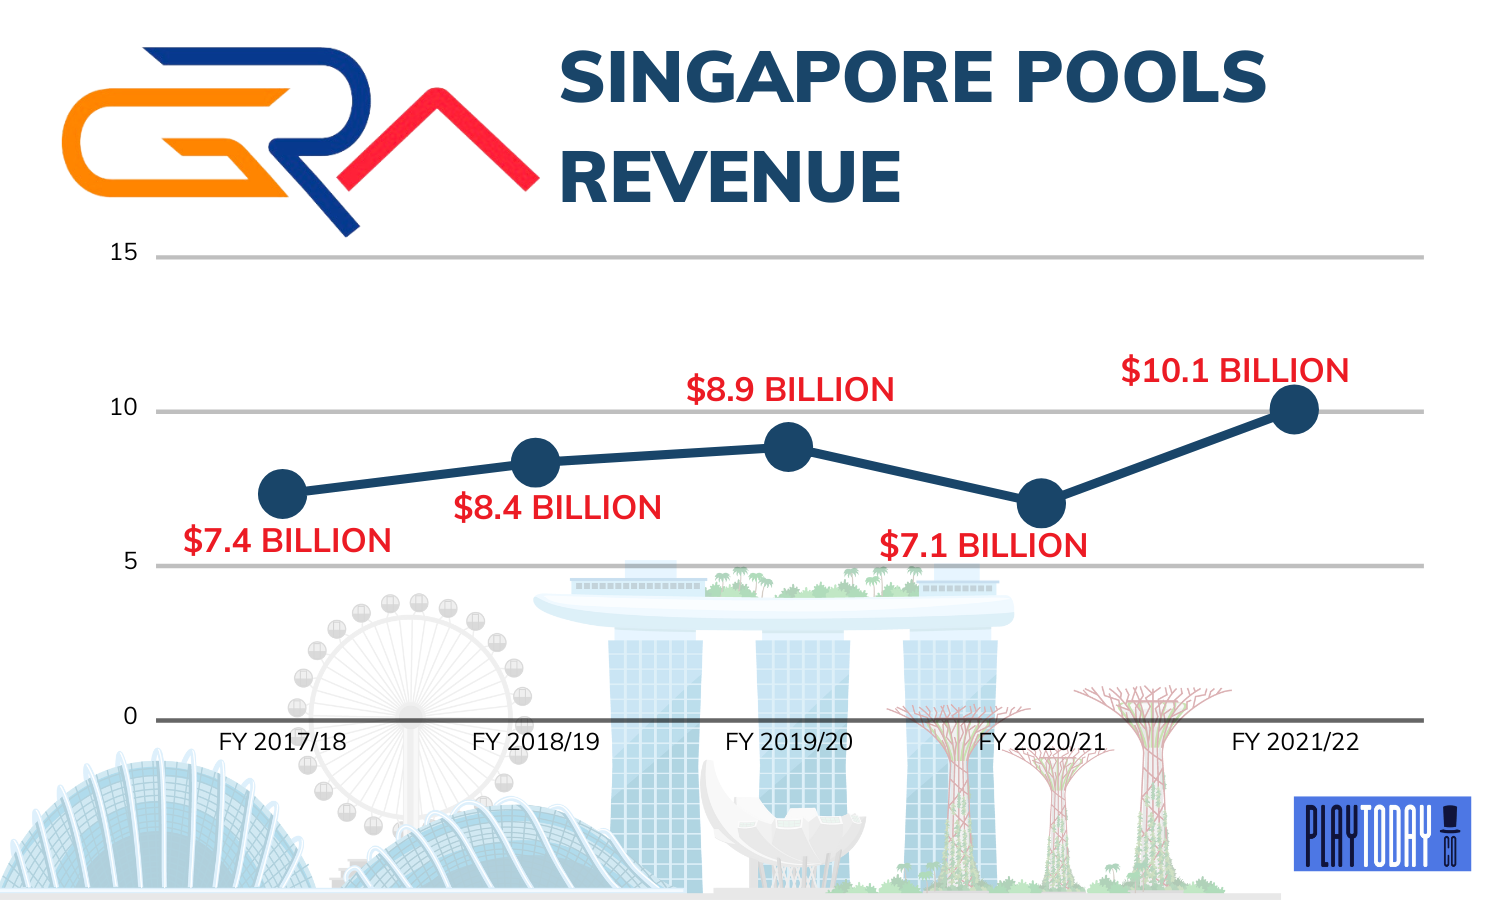 Singapore Pools Revenue from FY 2017/18 to FY 2021/22